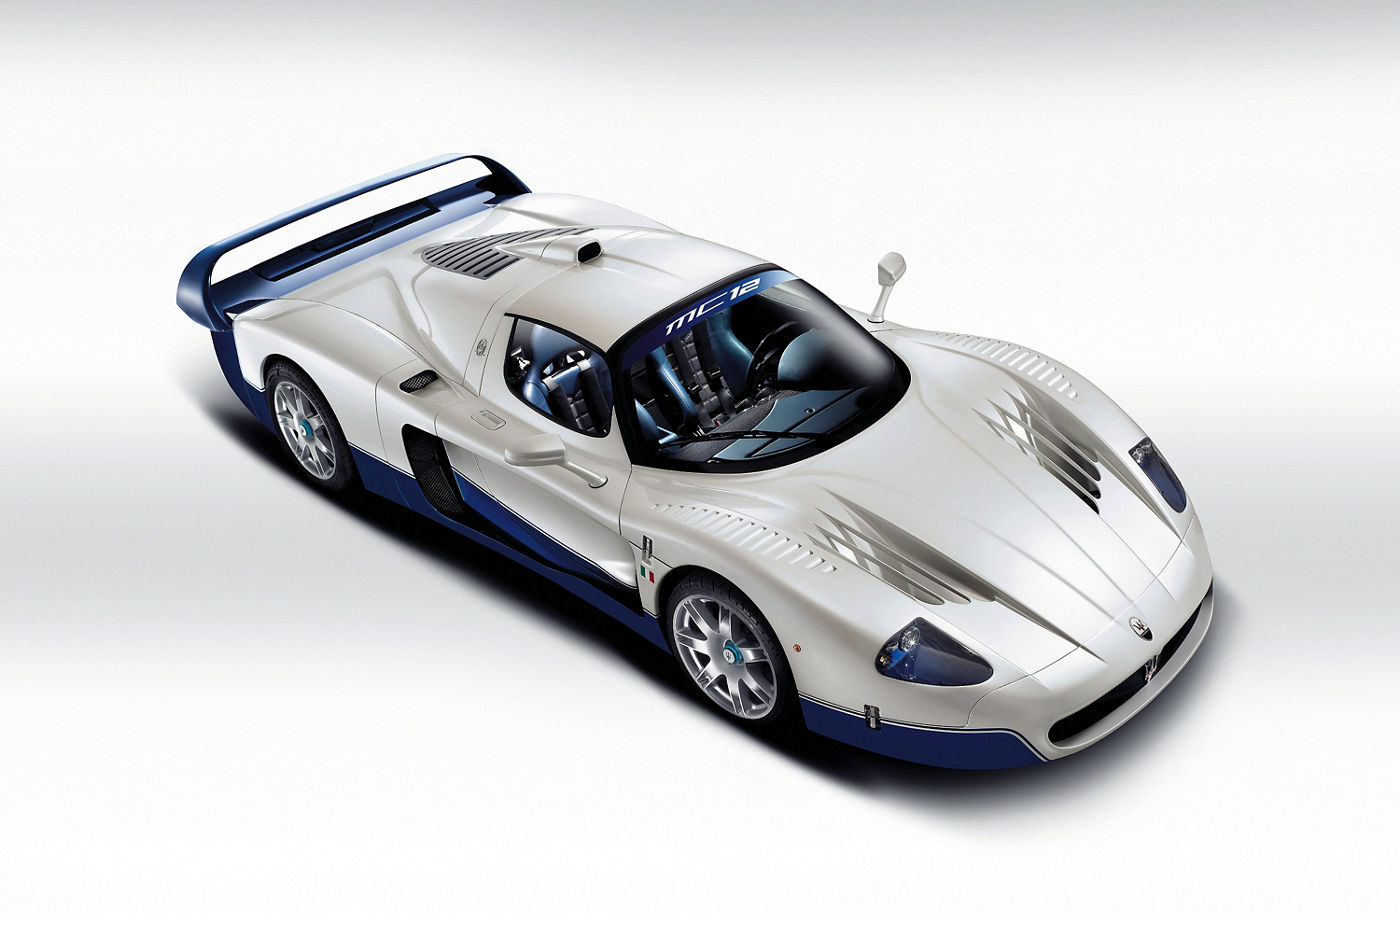 2004 Maserati MC12 Stradale (road-going) - the GT racing car - exterior of the classic sports cars